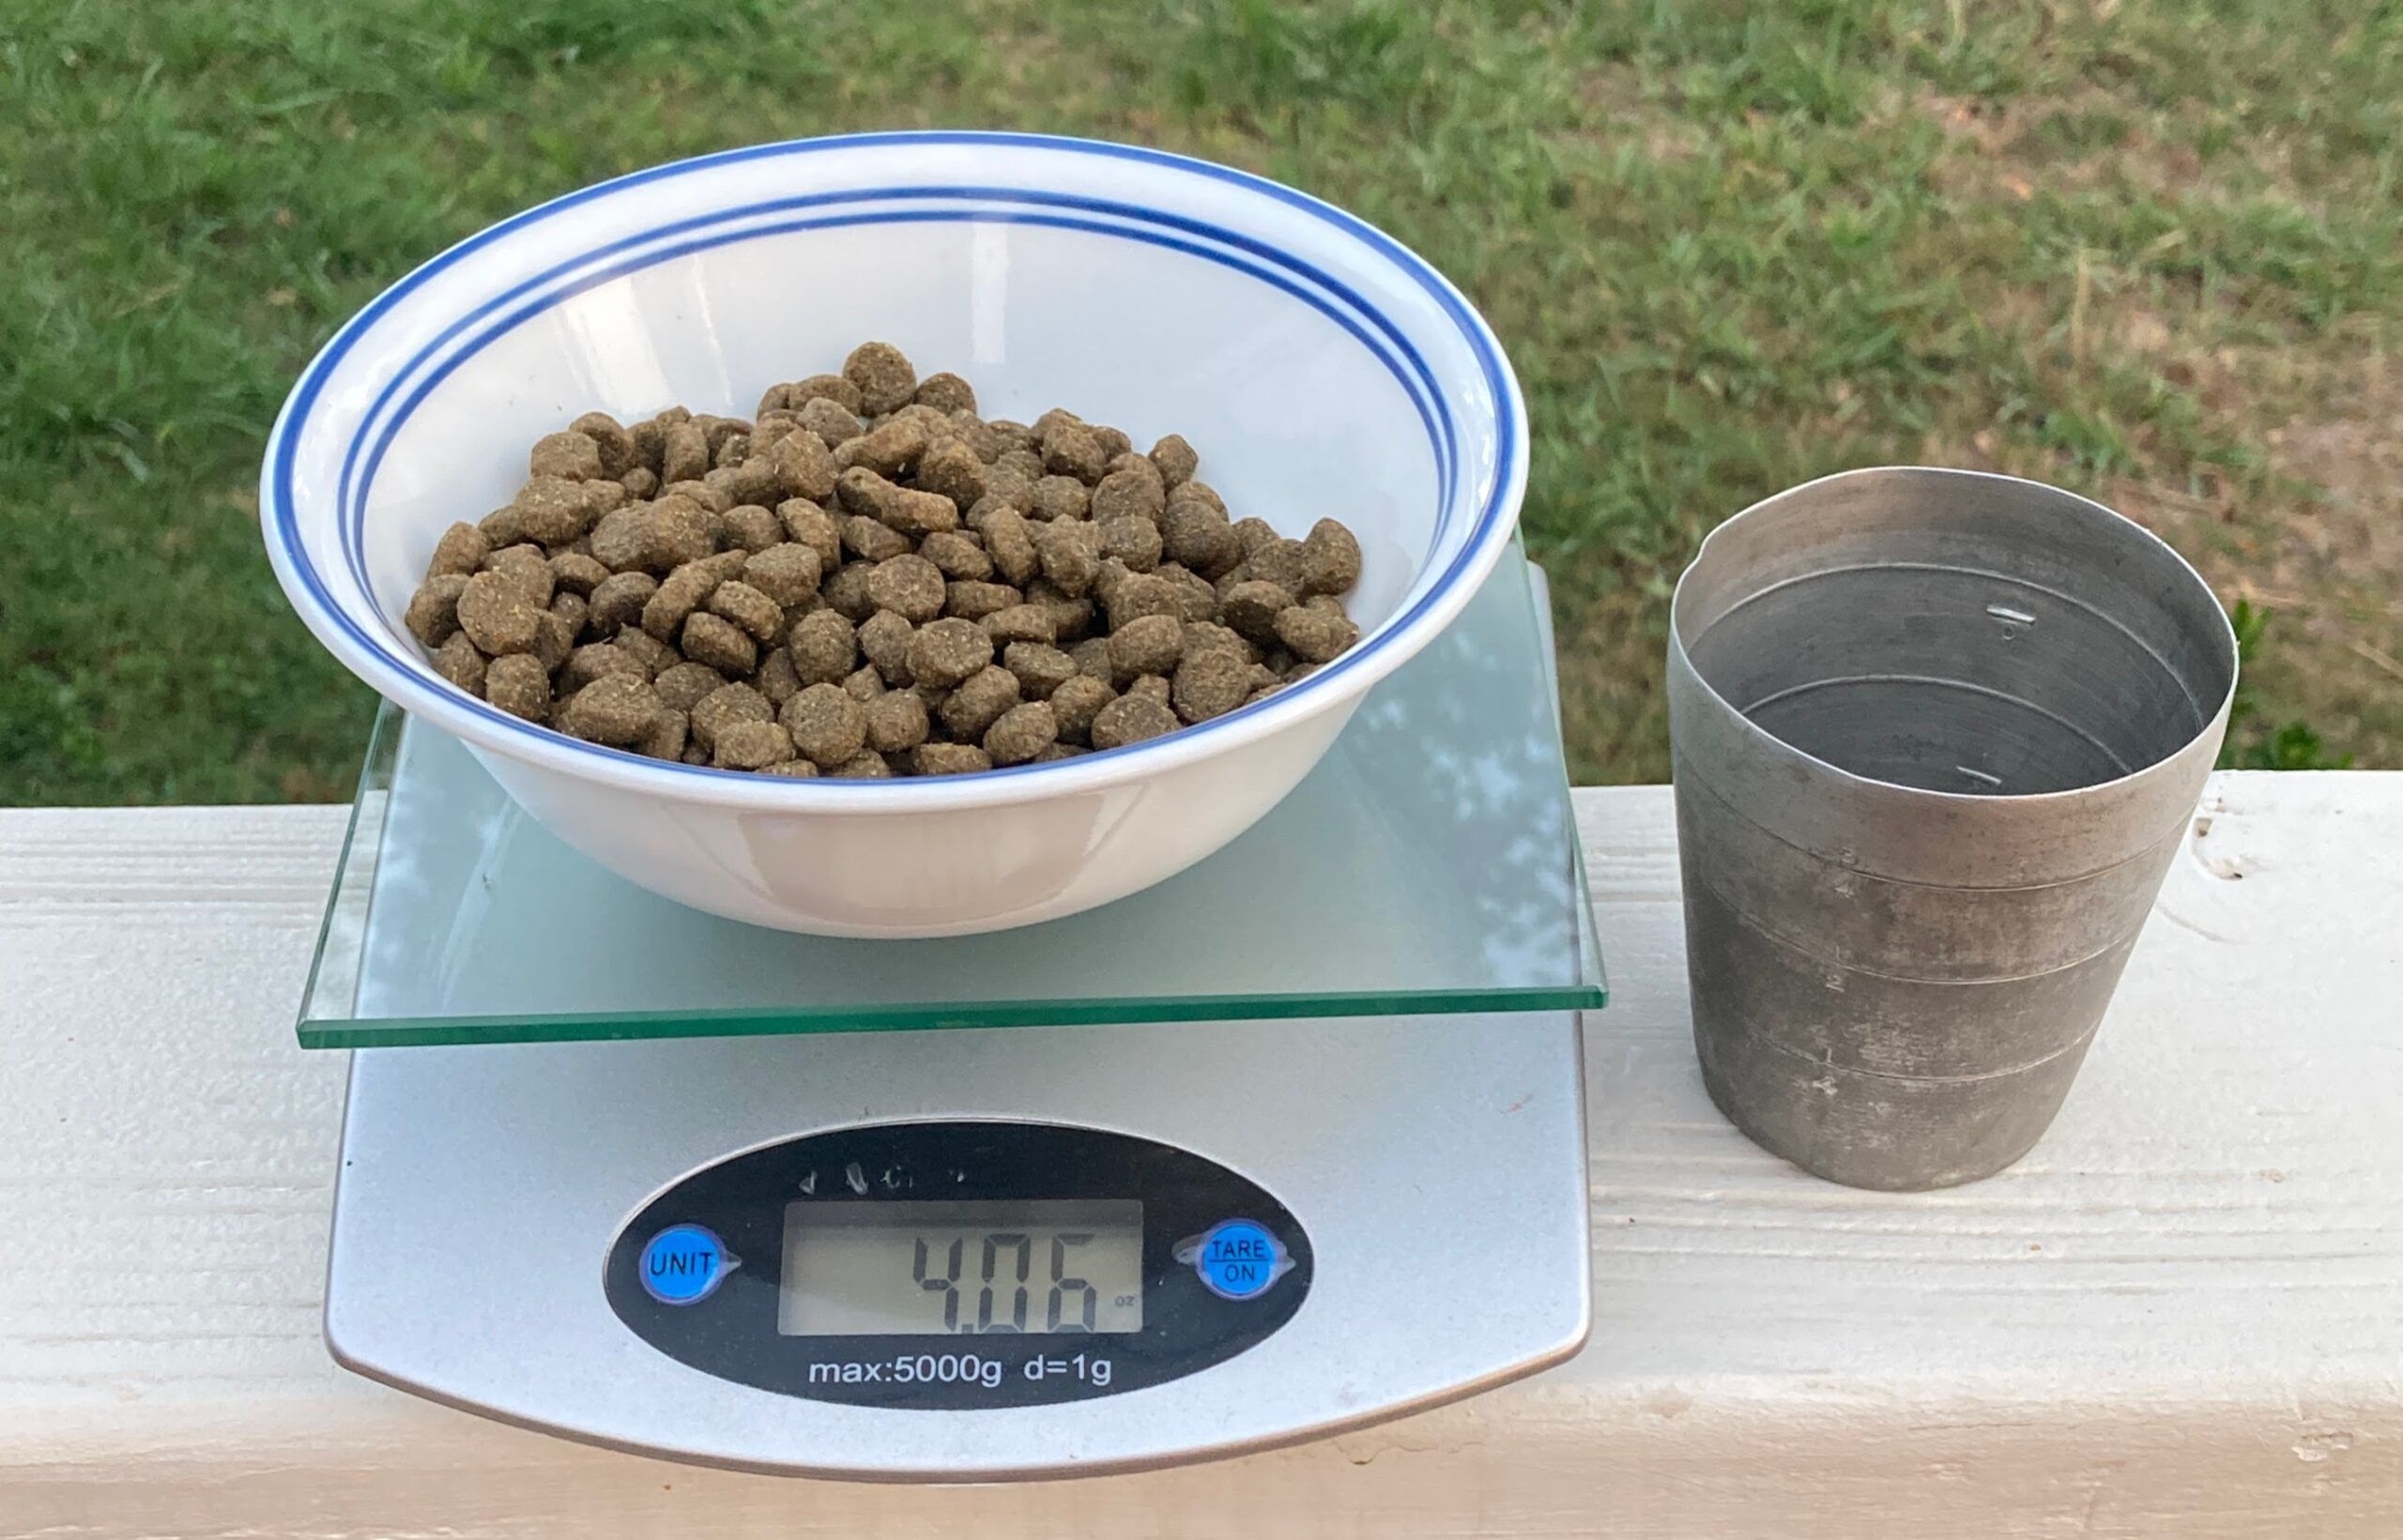 How Many Cups Of Dry Dog Food Are In A Pound